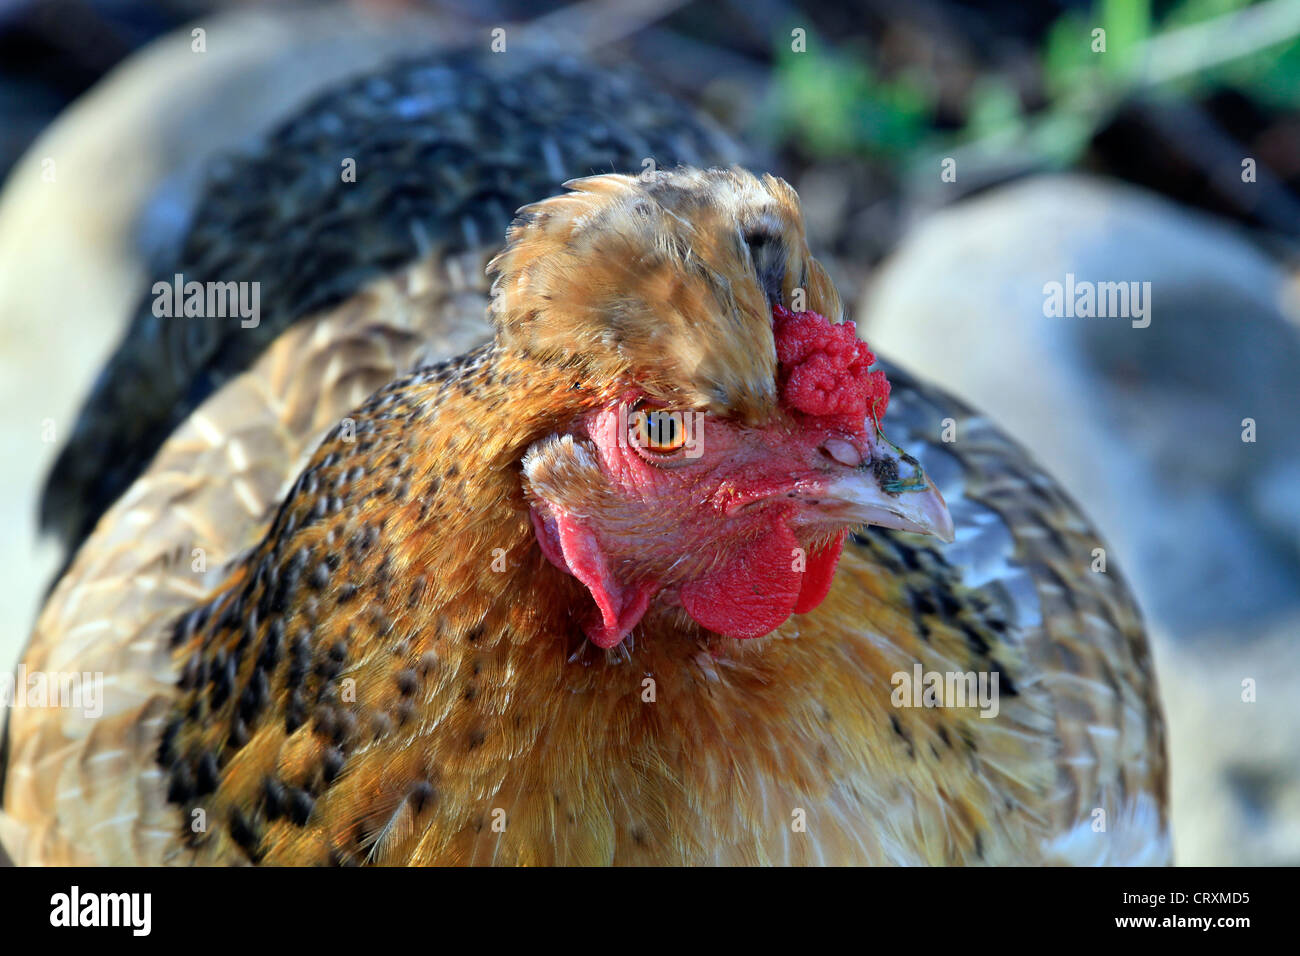 Chicken with red wattles and comb, Western Cape Province, South Africa. Stock Photo